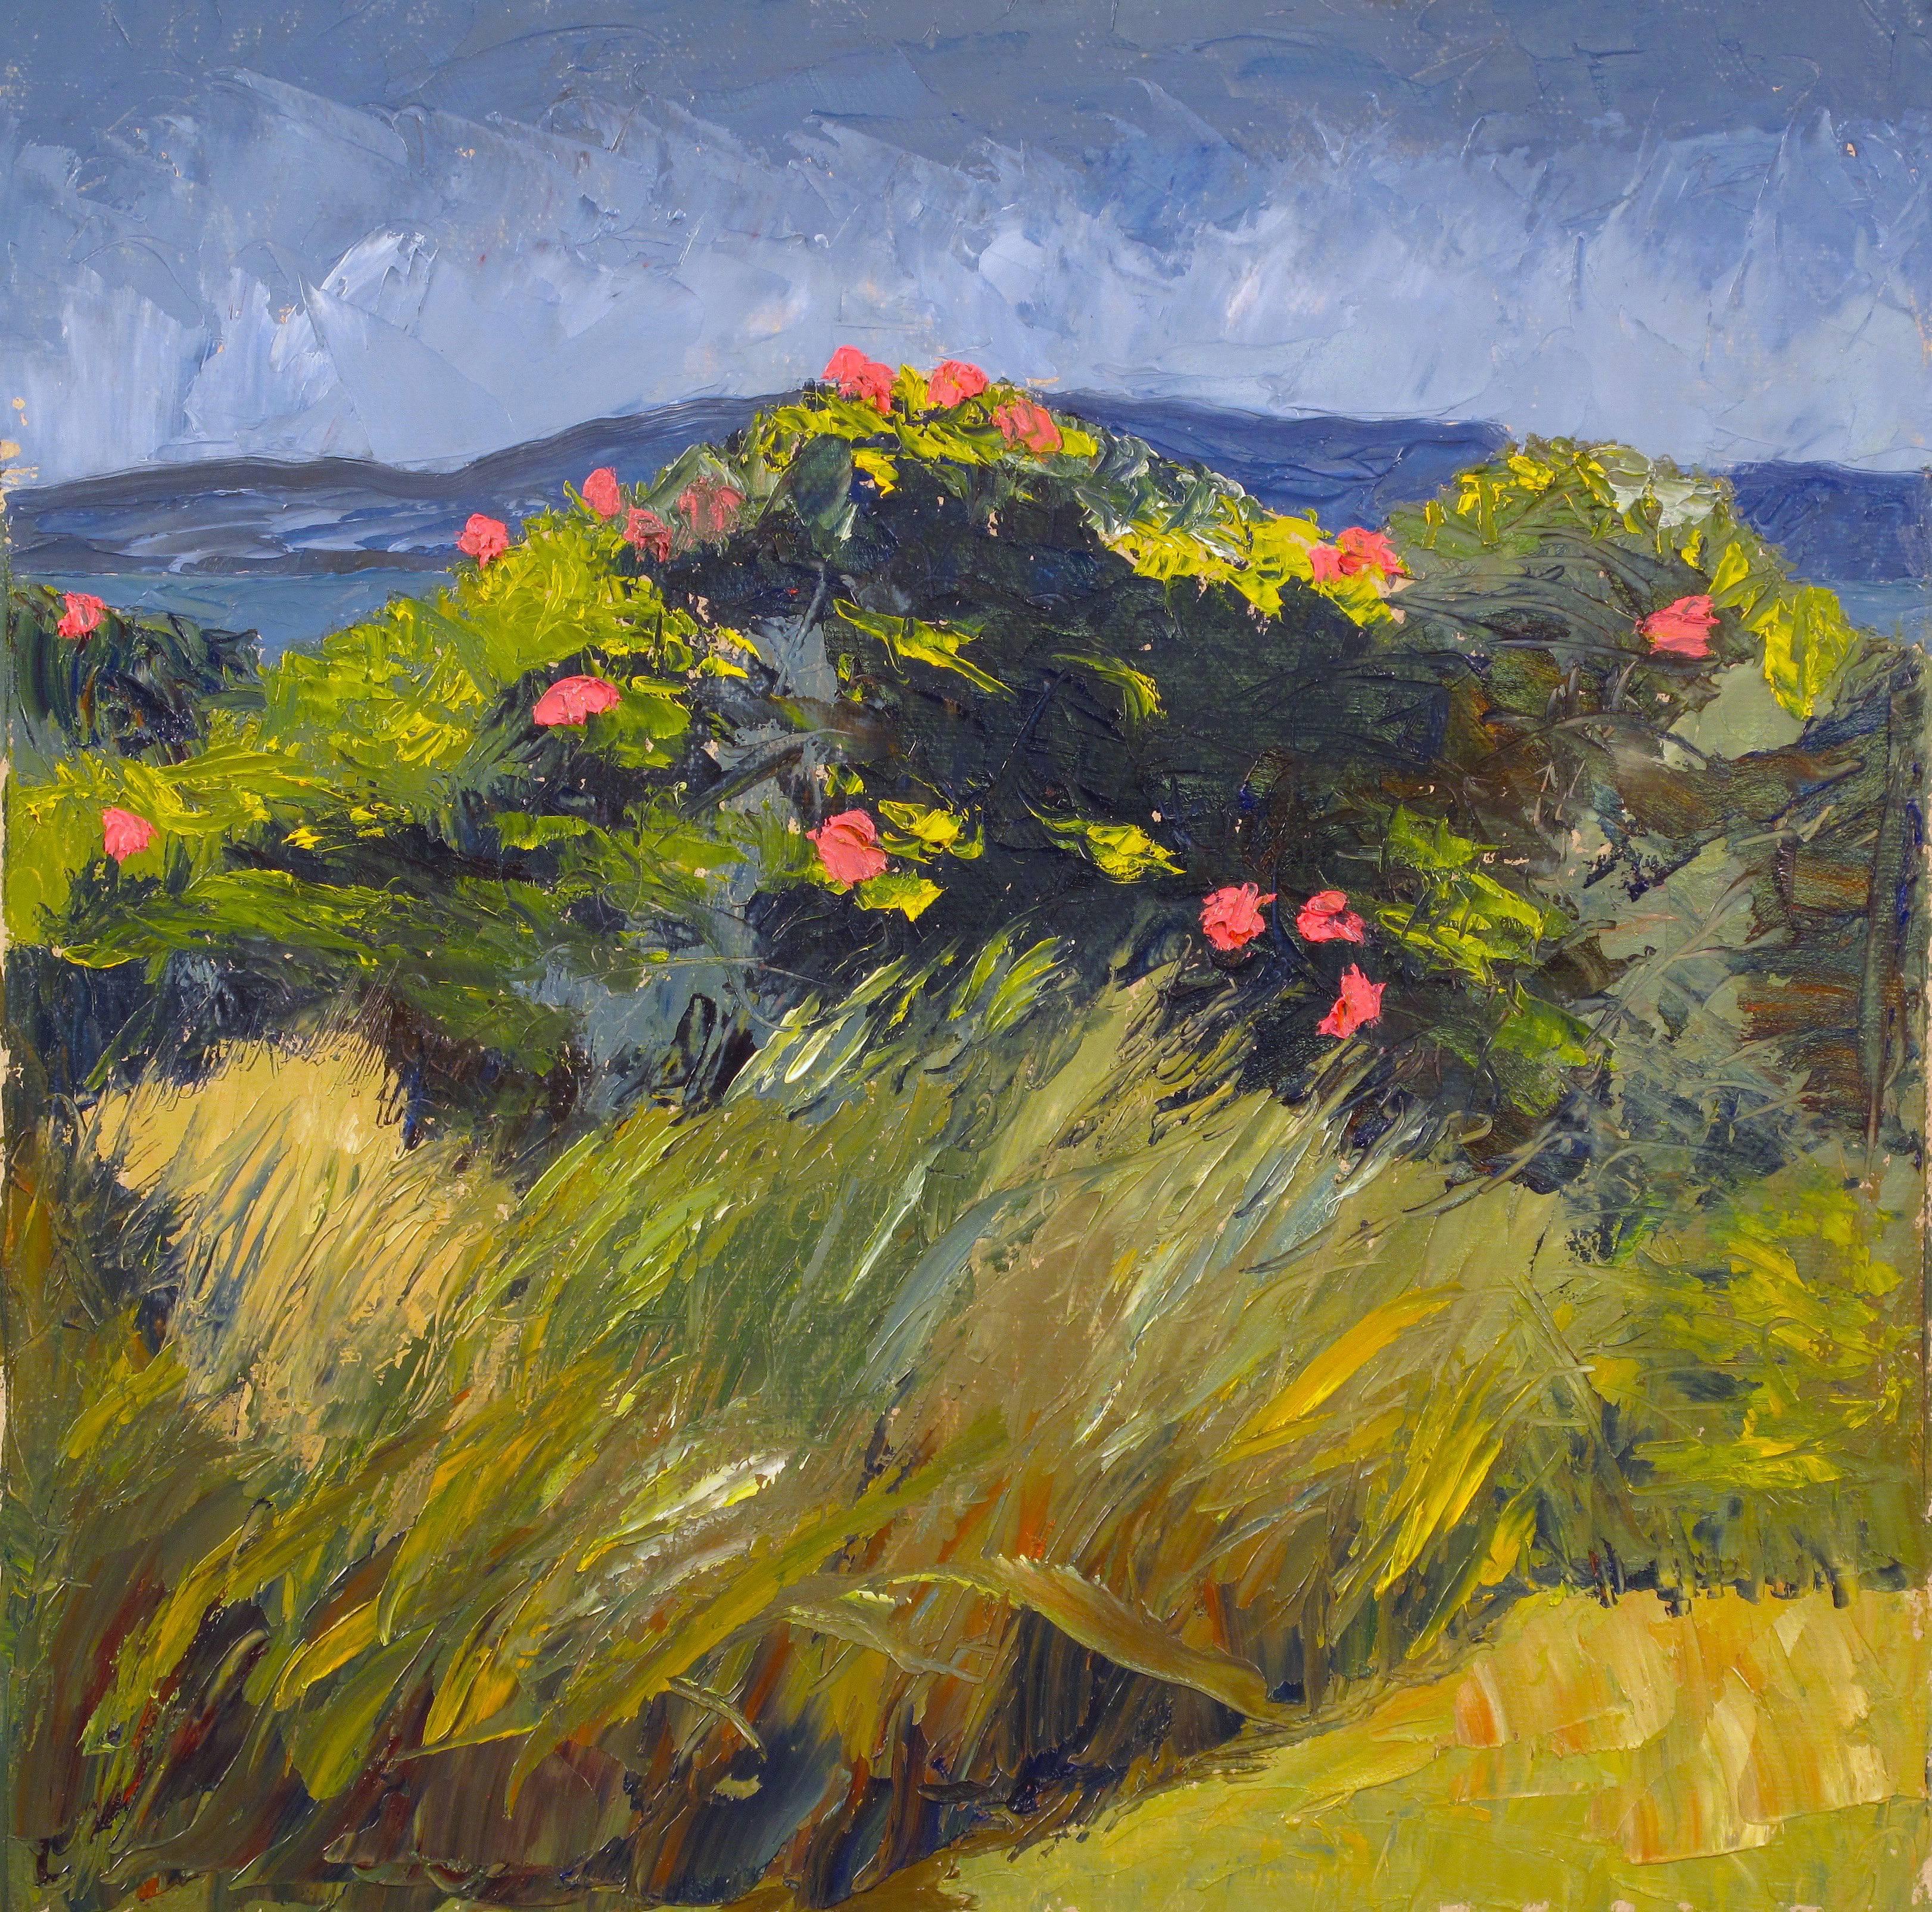 "Roses in the Dune" contemporary plein air painting by American Impressionist 